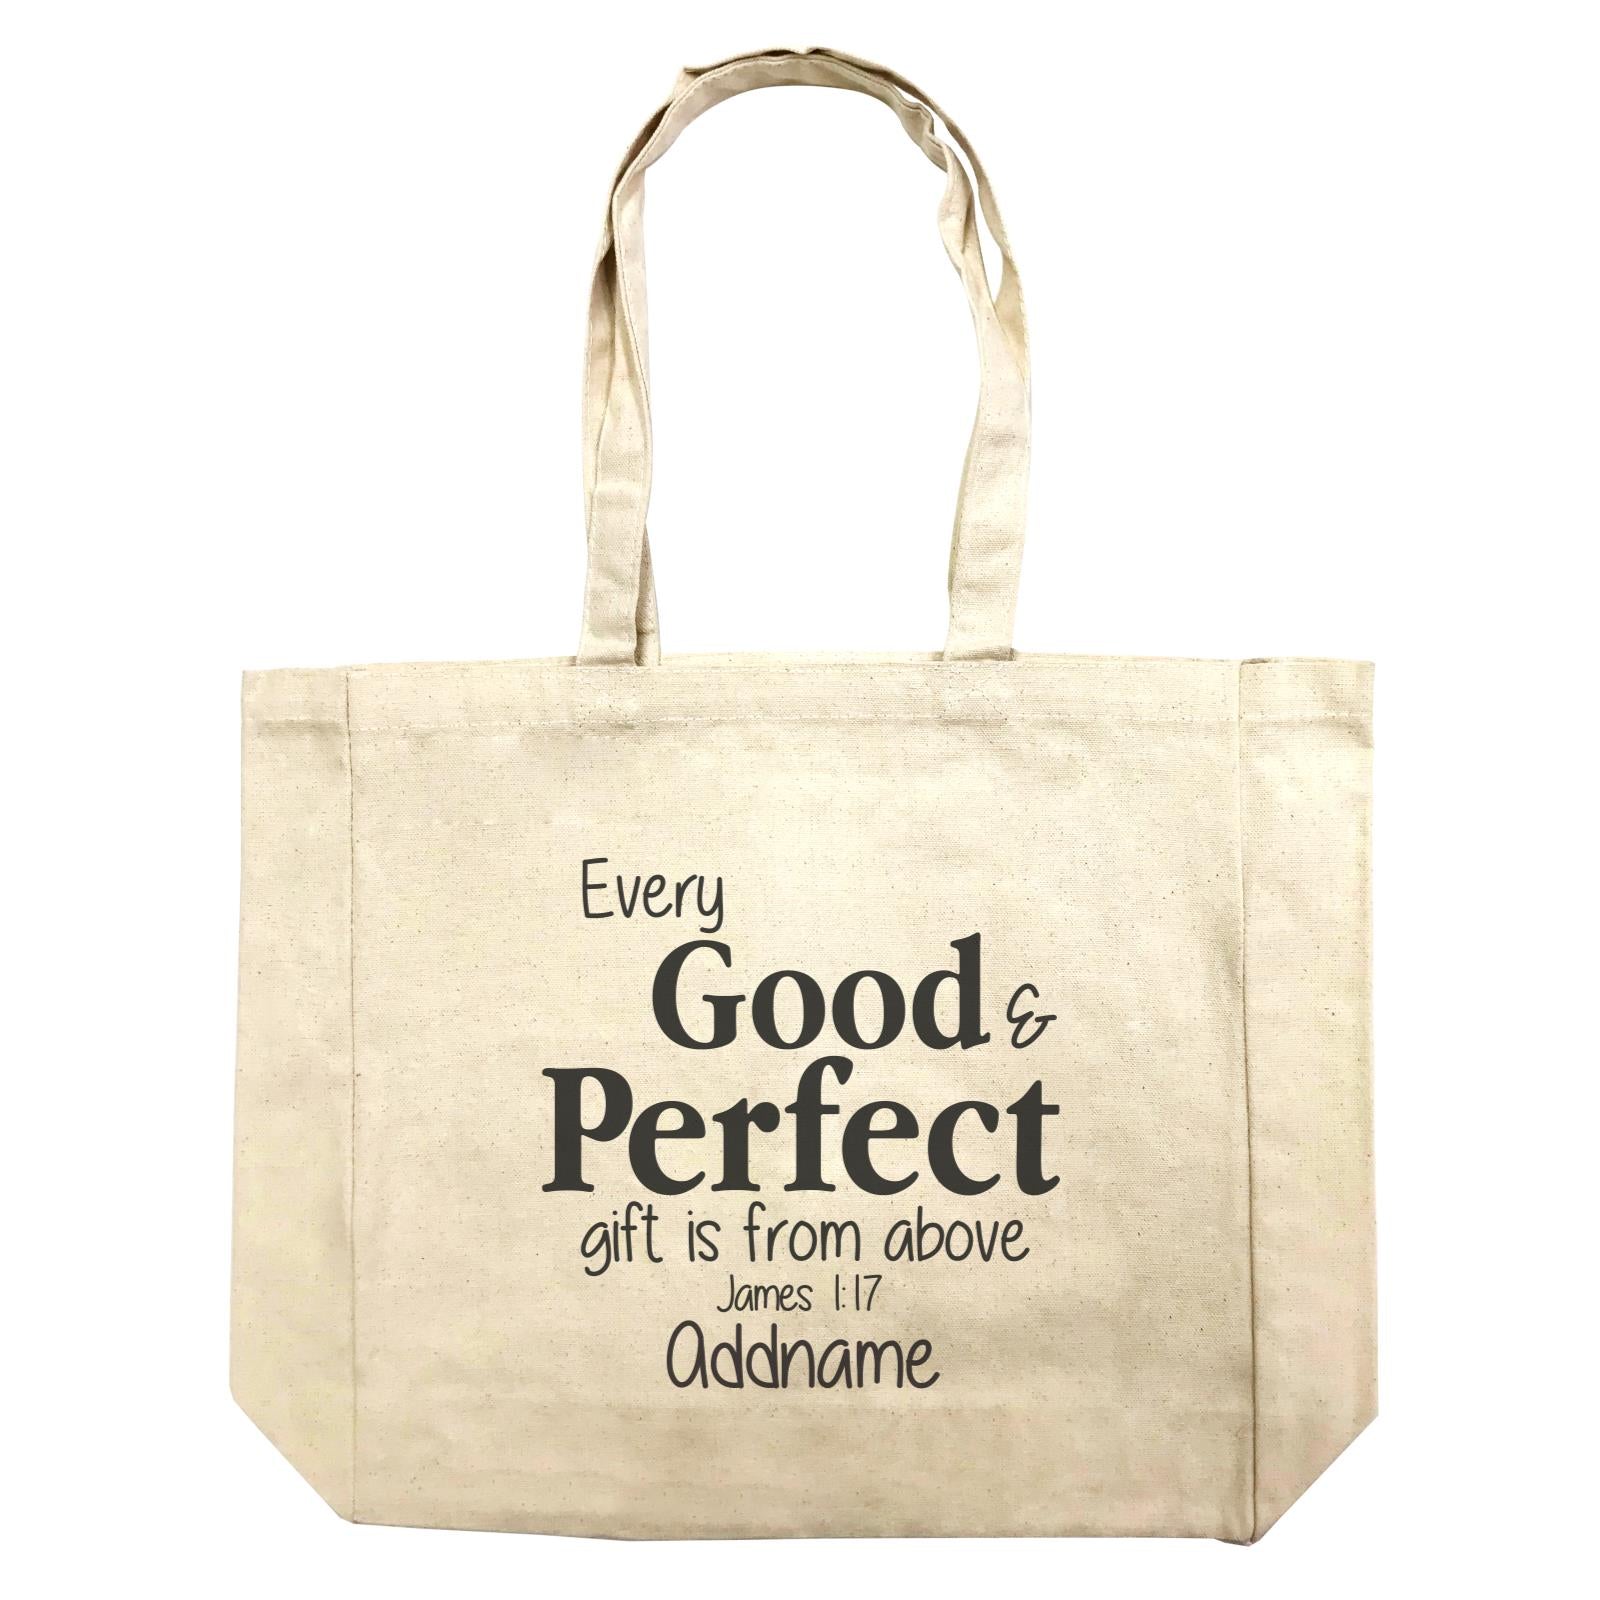 Christ Newborn Every Good and Perfect Gift is from Above James 1.17 Addname Shopping Bag